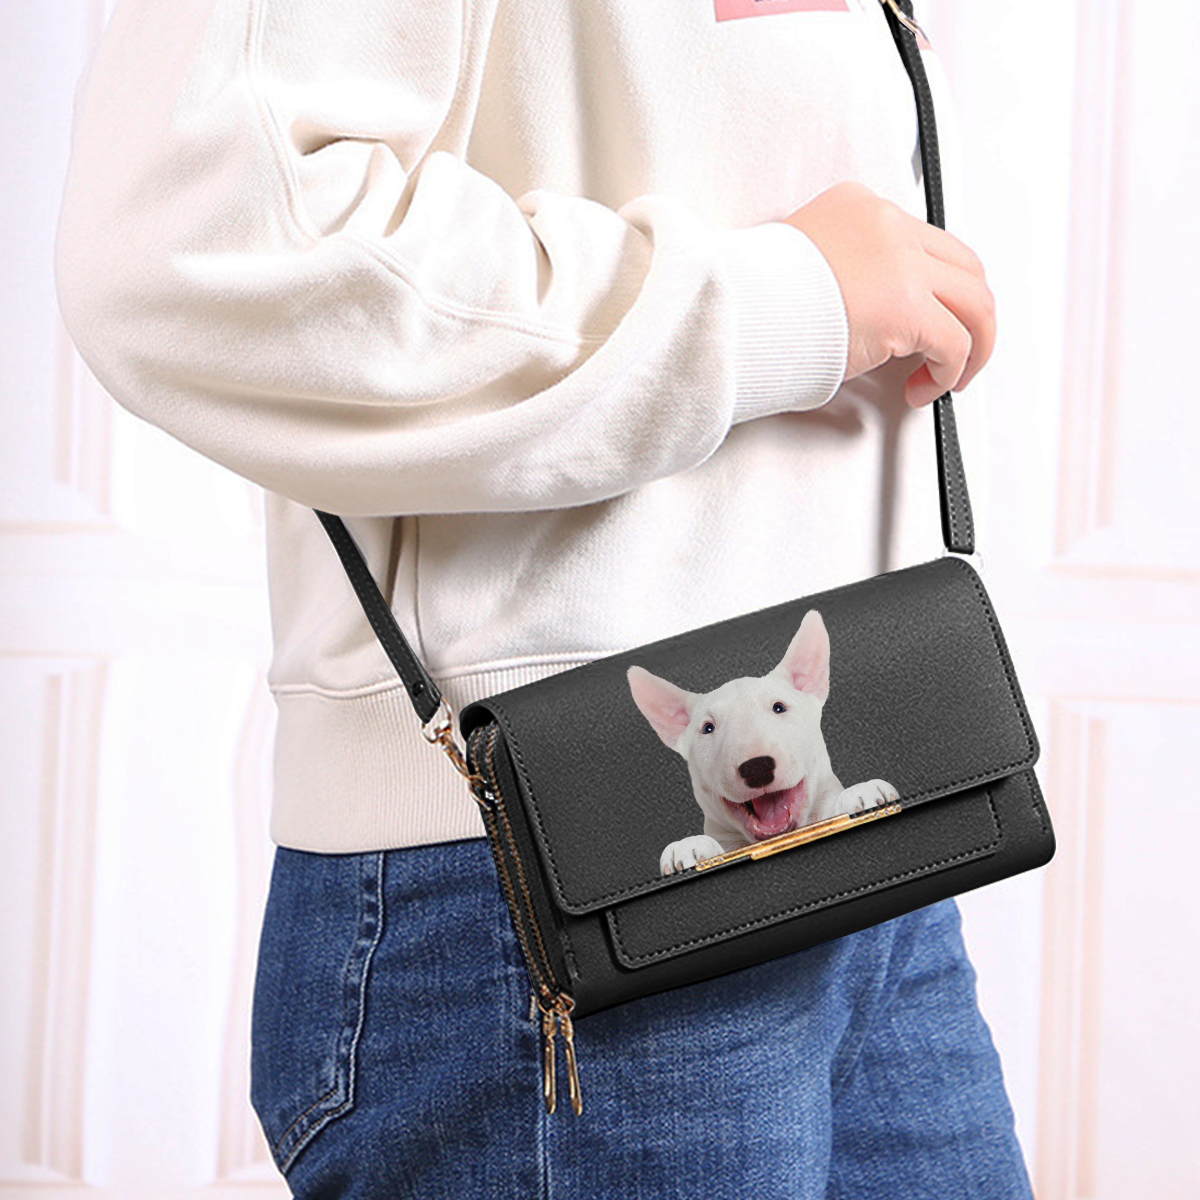 Can You See - Bull Terrier Crossbody Purse Women Clutch V2